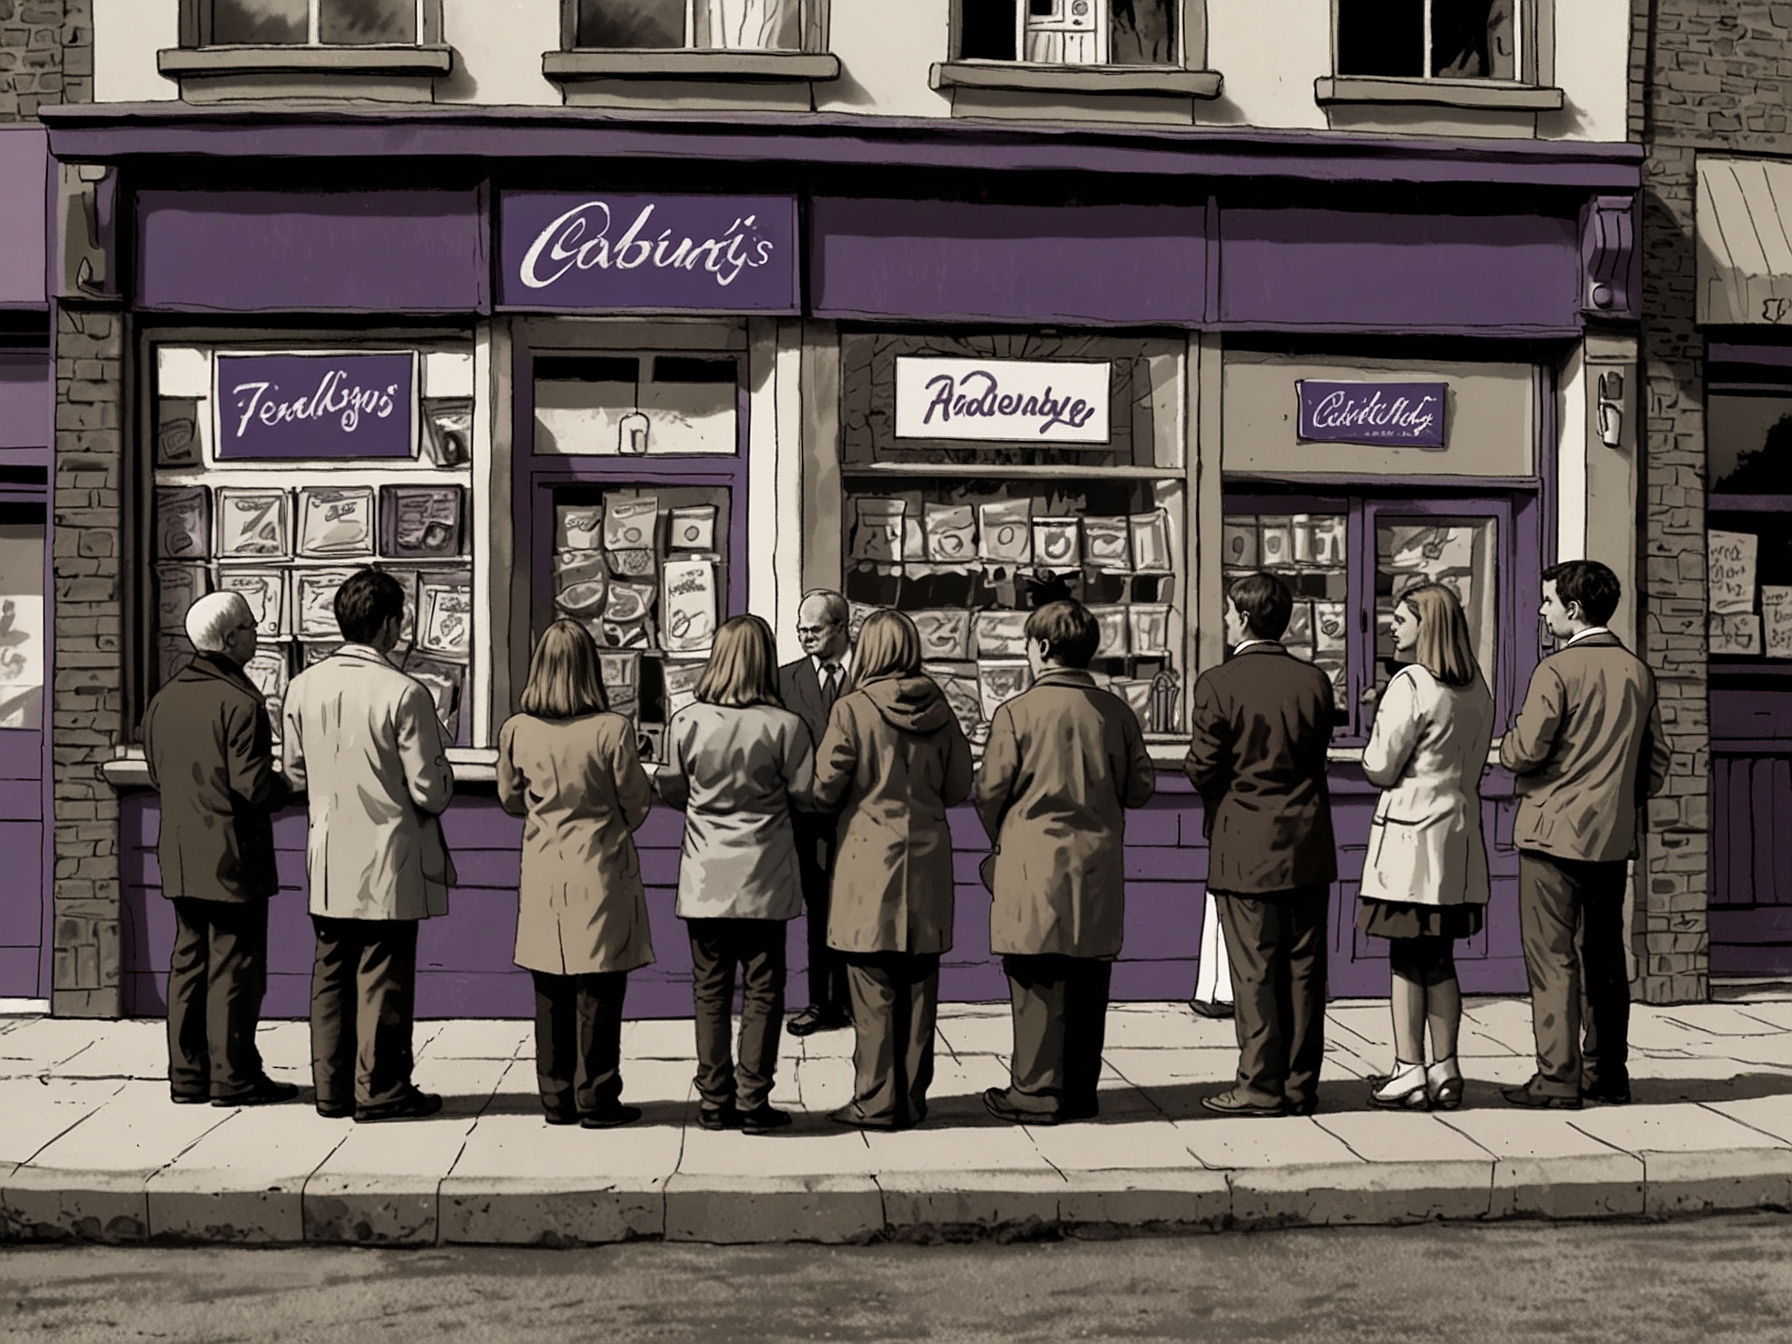 Adults and children excitedly line up to purchase Cadbury Freddos at a supermarket, eager to enjoy the chocolate treat at its nostalgic price of 10p.